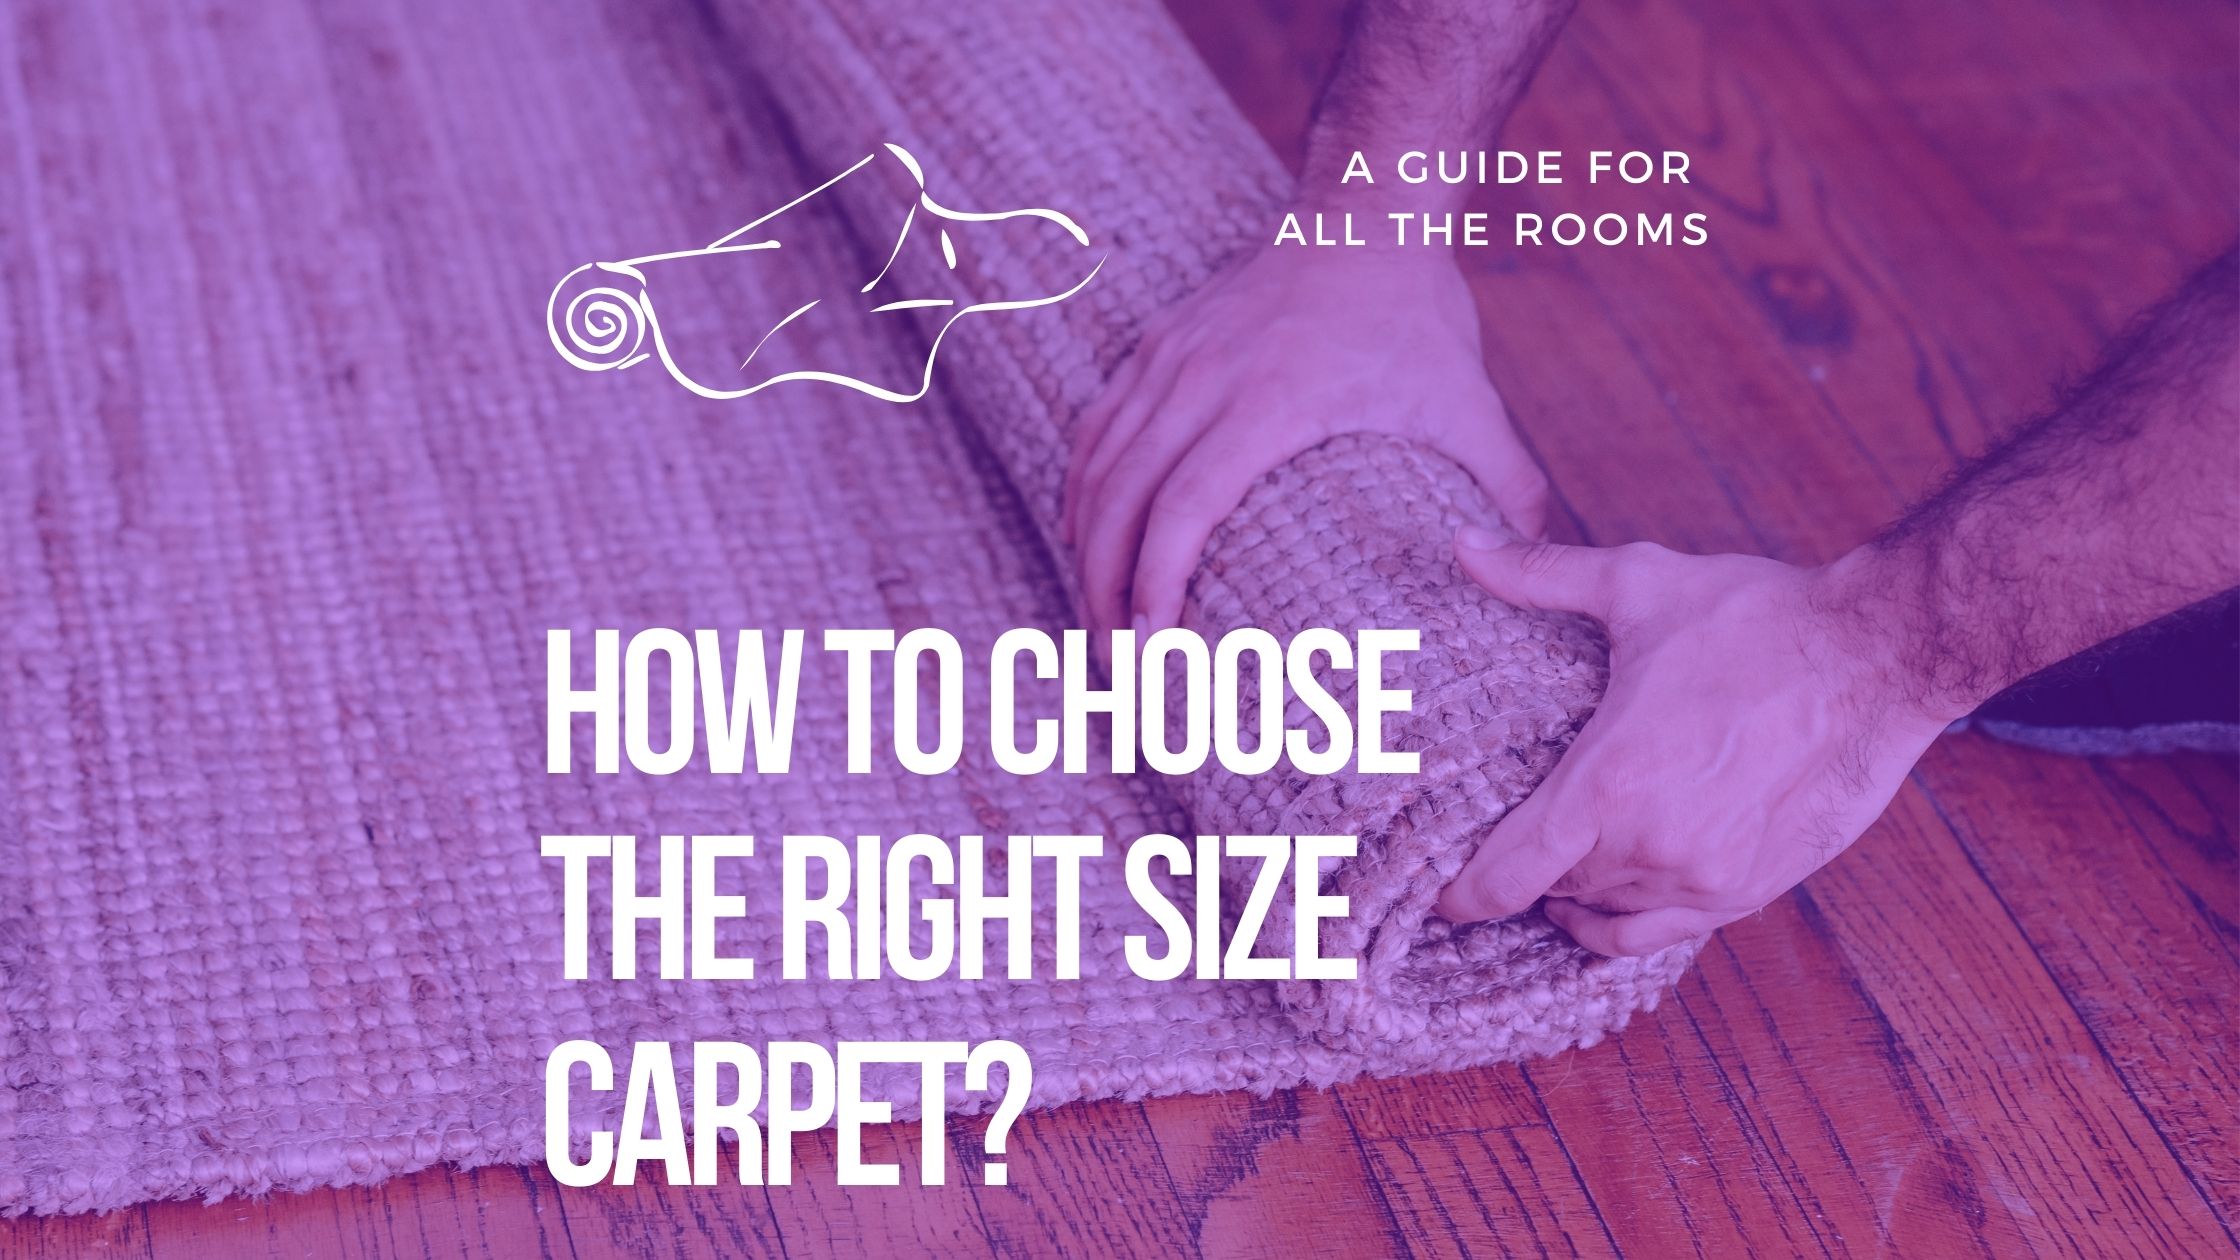 How To Choose The Right Size Carpet?